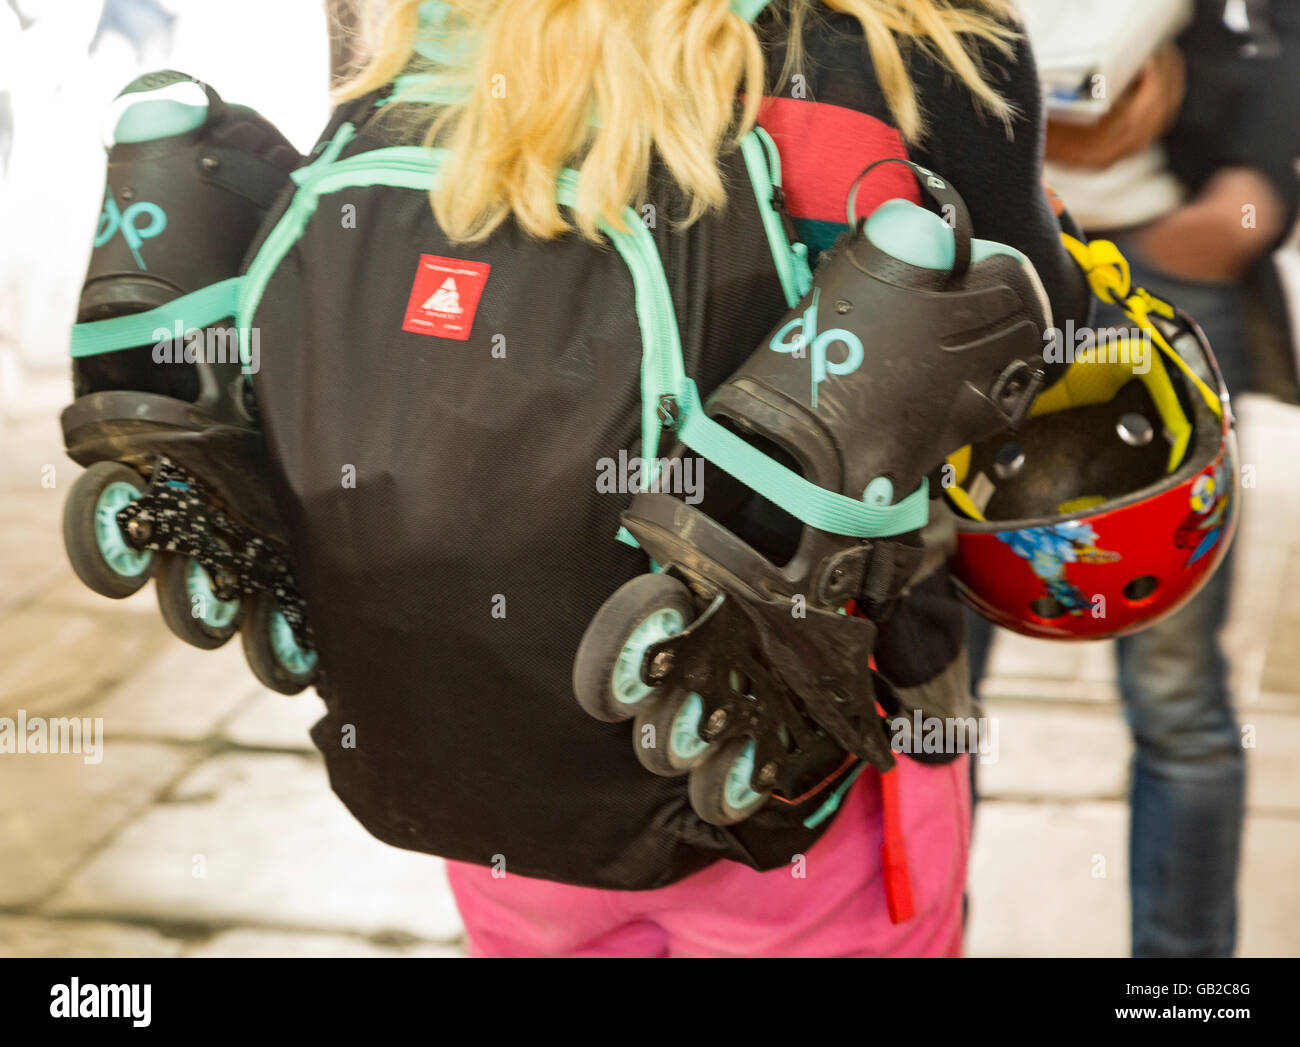 Carrying in line skates and Helmut, Backpack, Hair, Wheels, Stock Photo